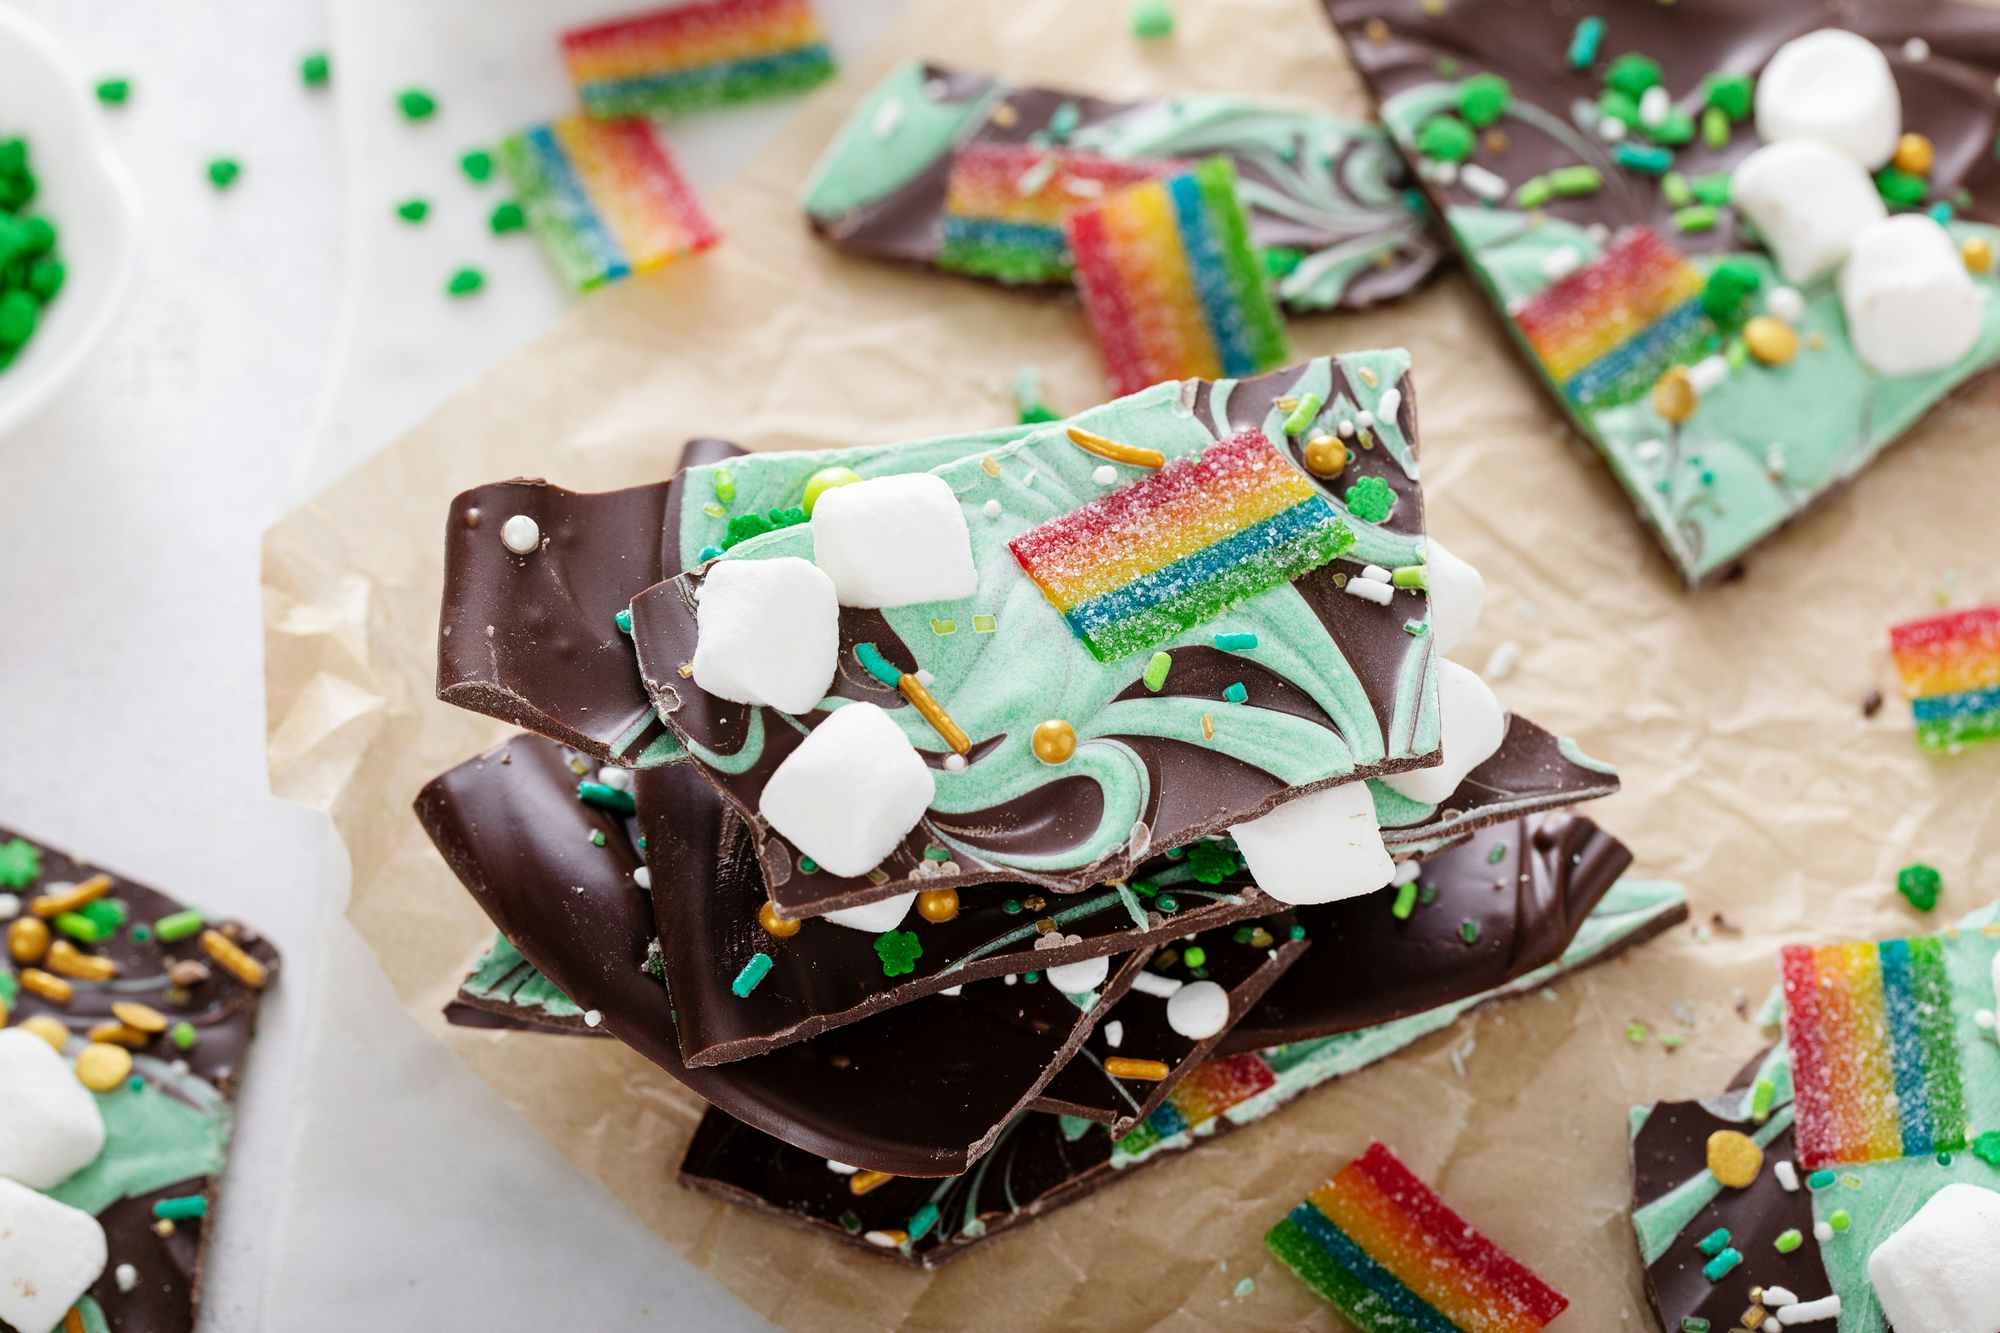 Some chocolate bark with marshmallows and rainbow candy